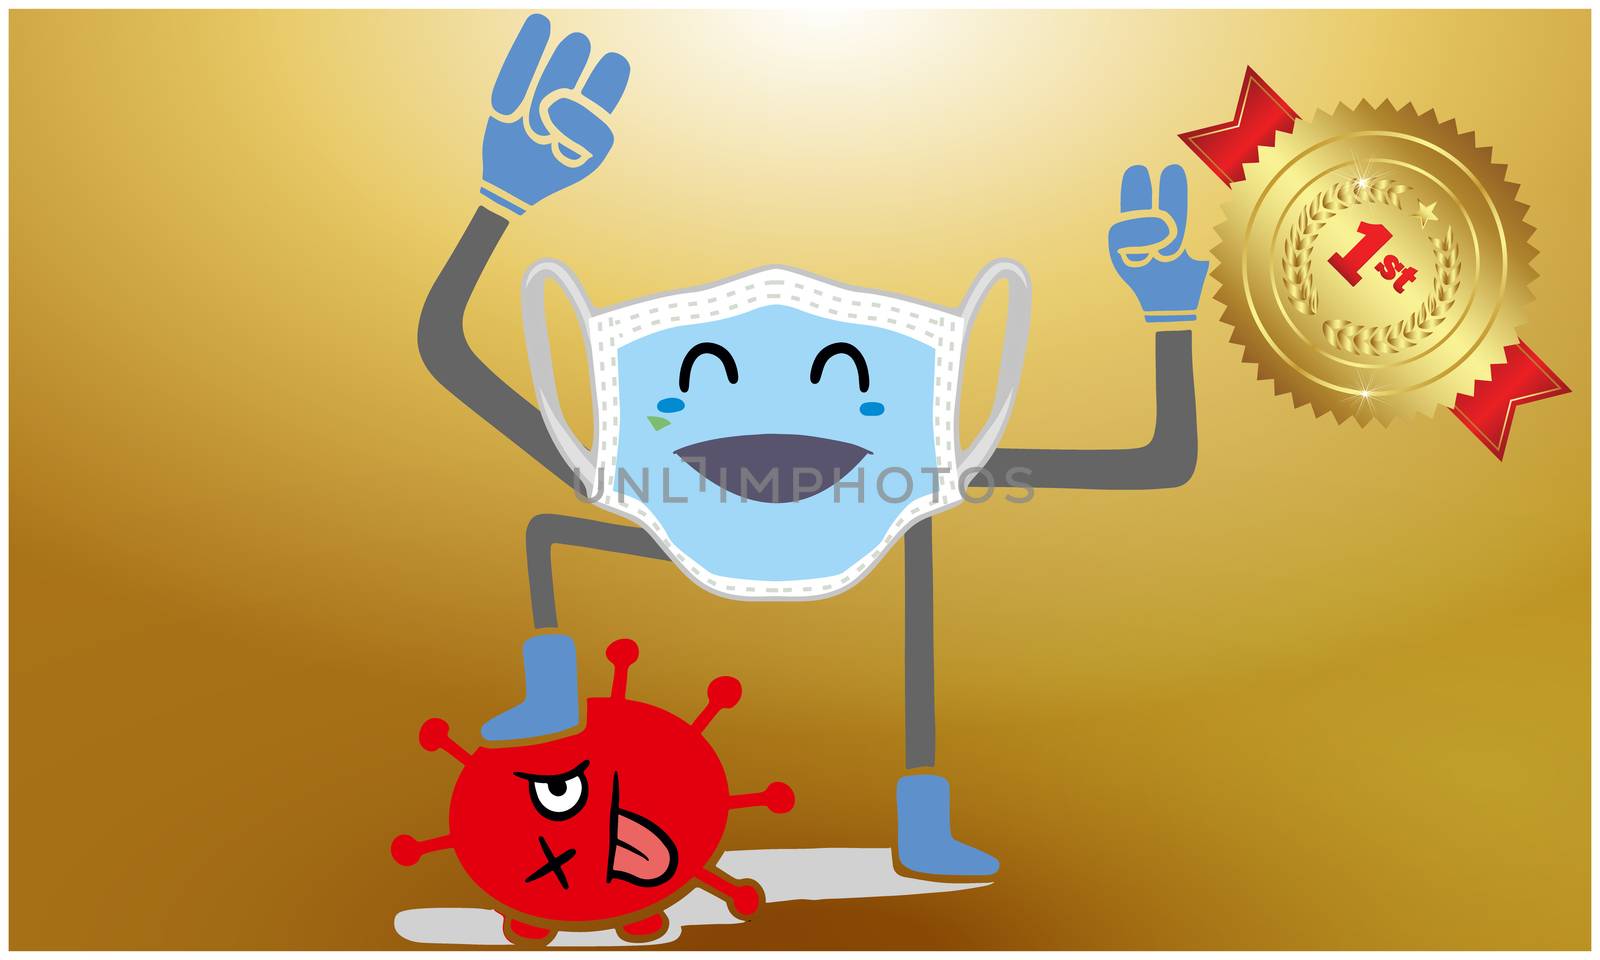 protection mask kills the germs and become winner by aanavcreationsplus